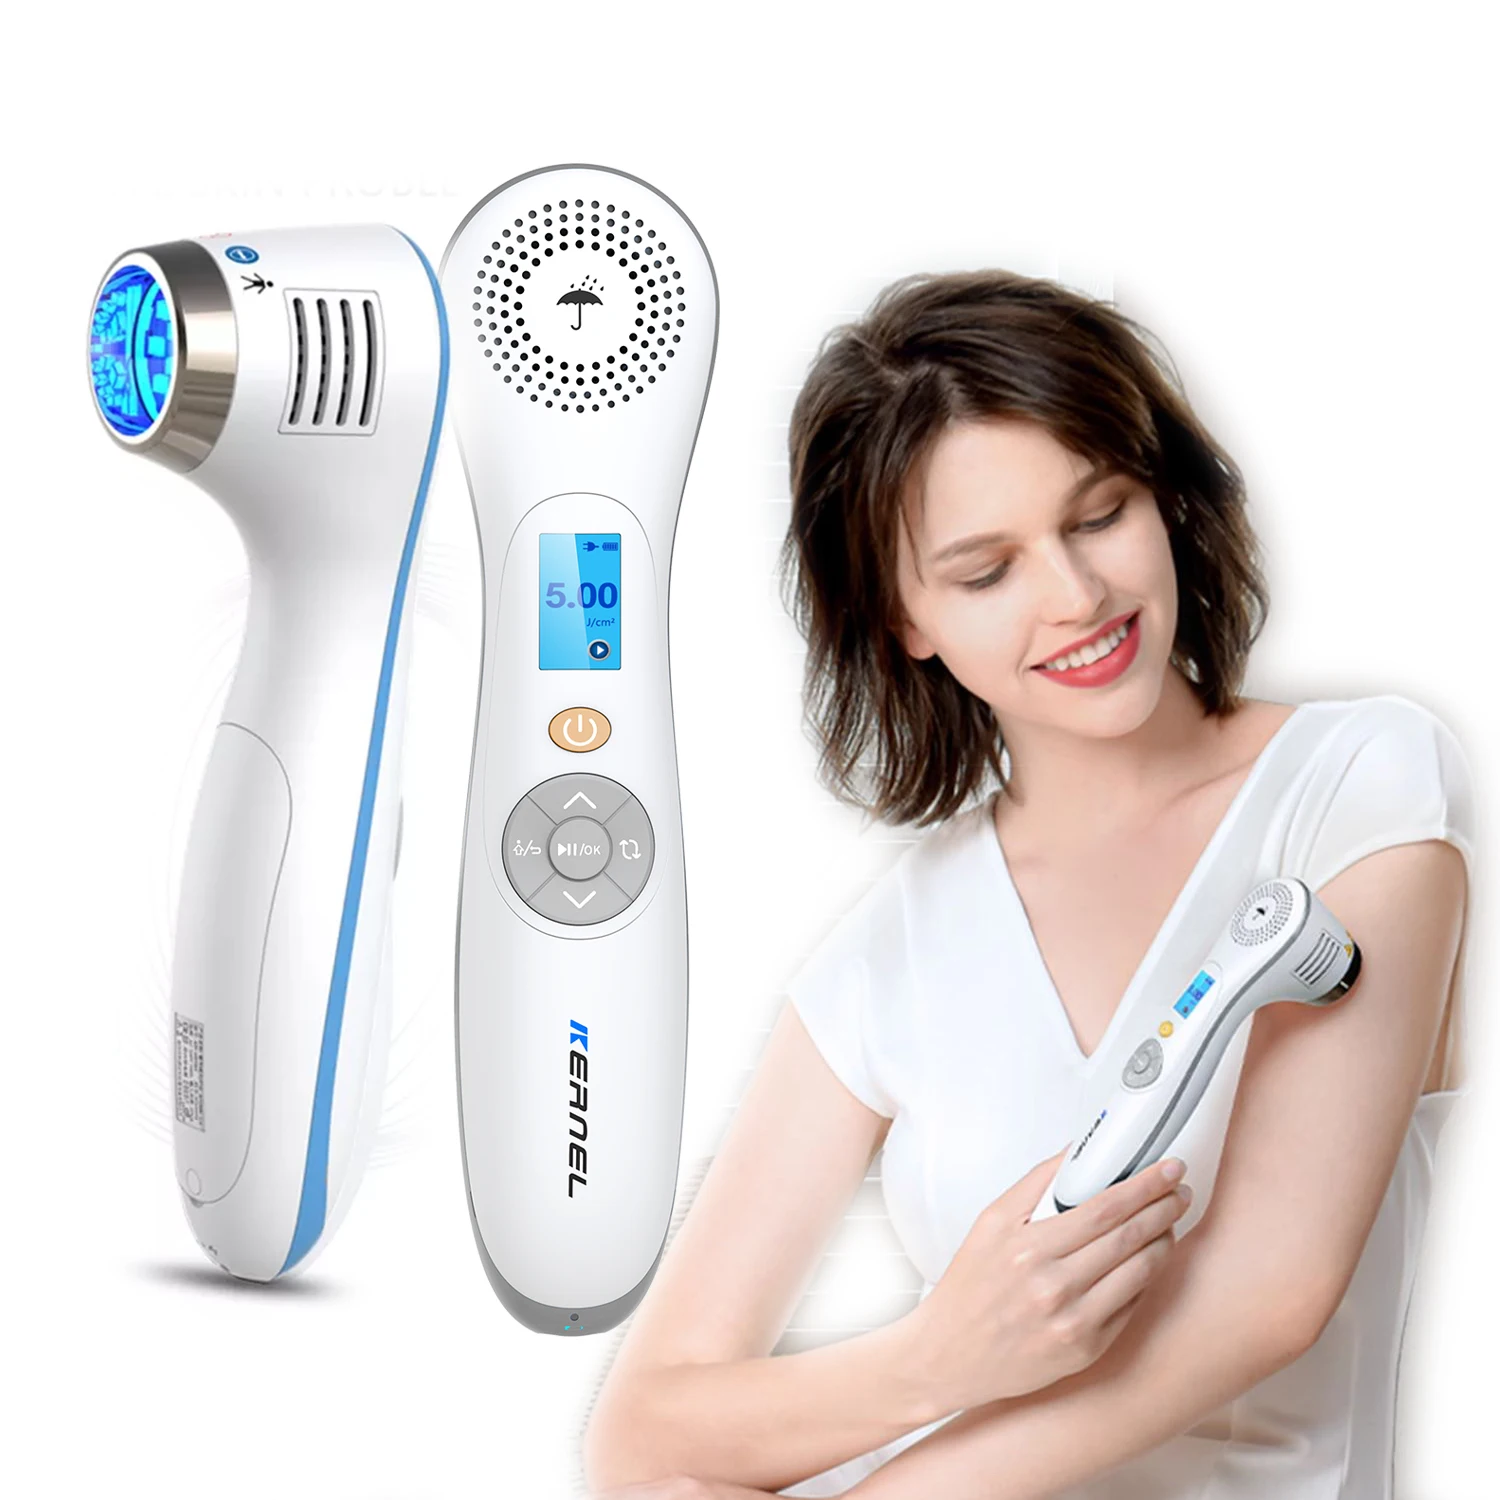 

Handheld 308nm LED UVB Phototherapy Kernel KN-4003B3 Home Phototherapy UV Therapy Light Psoriasis Vitiligo Treatment